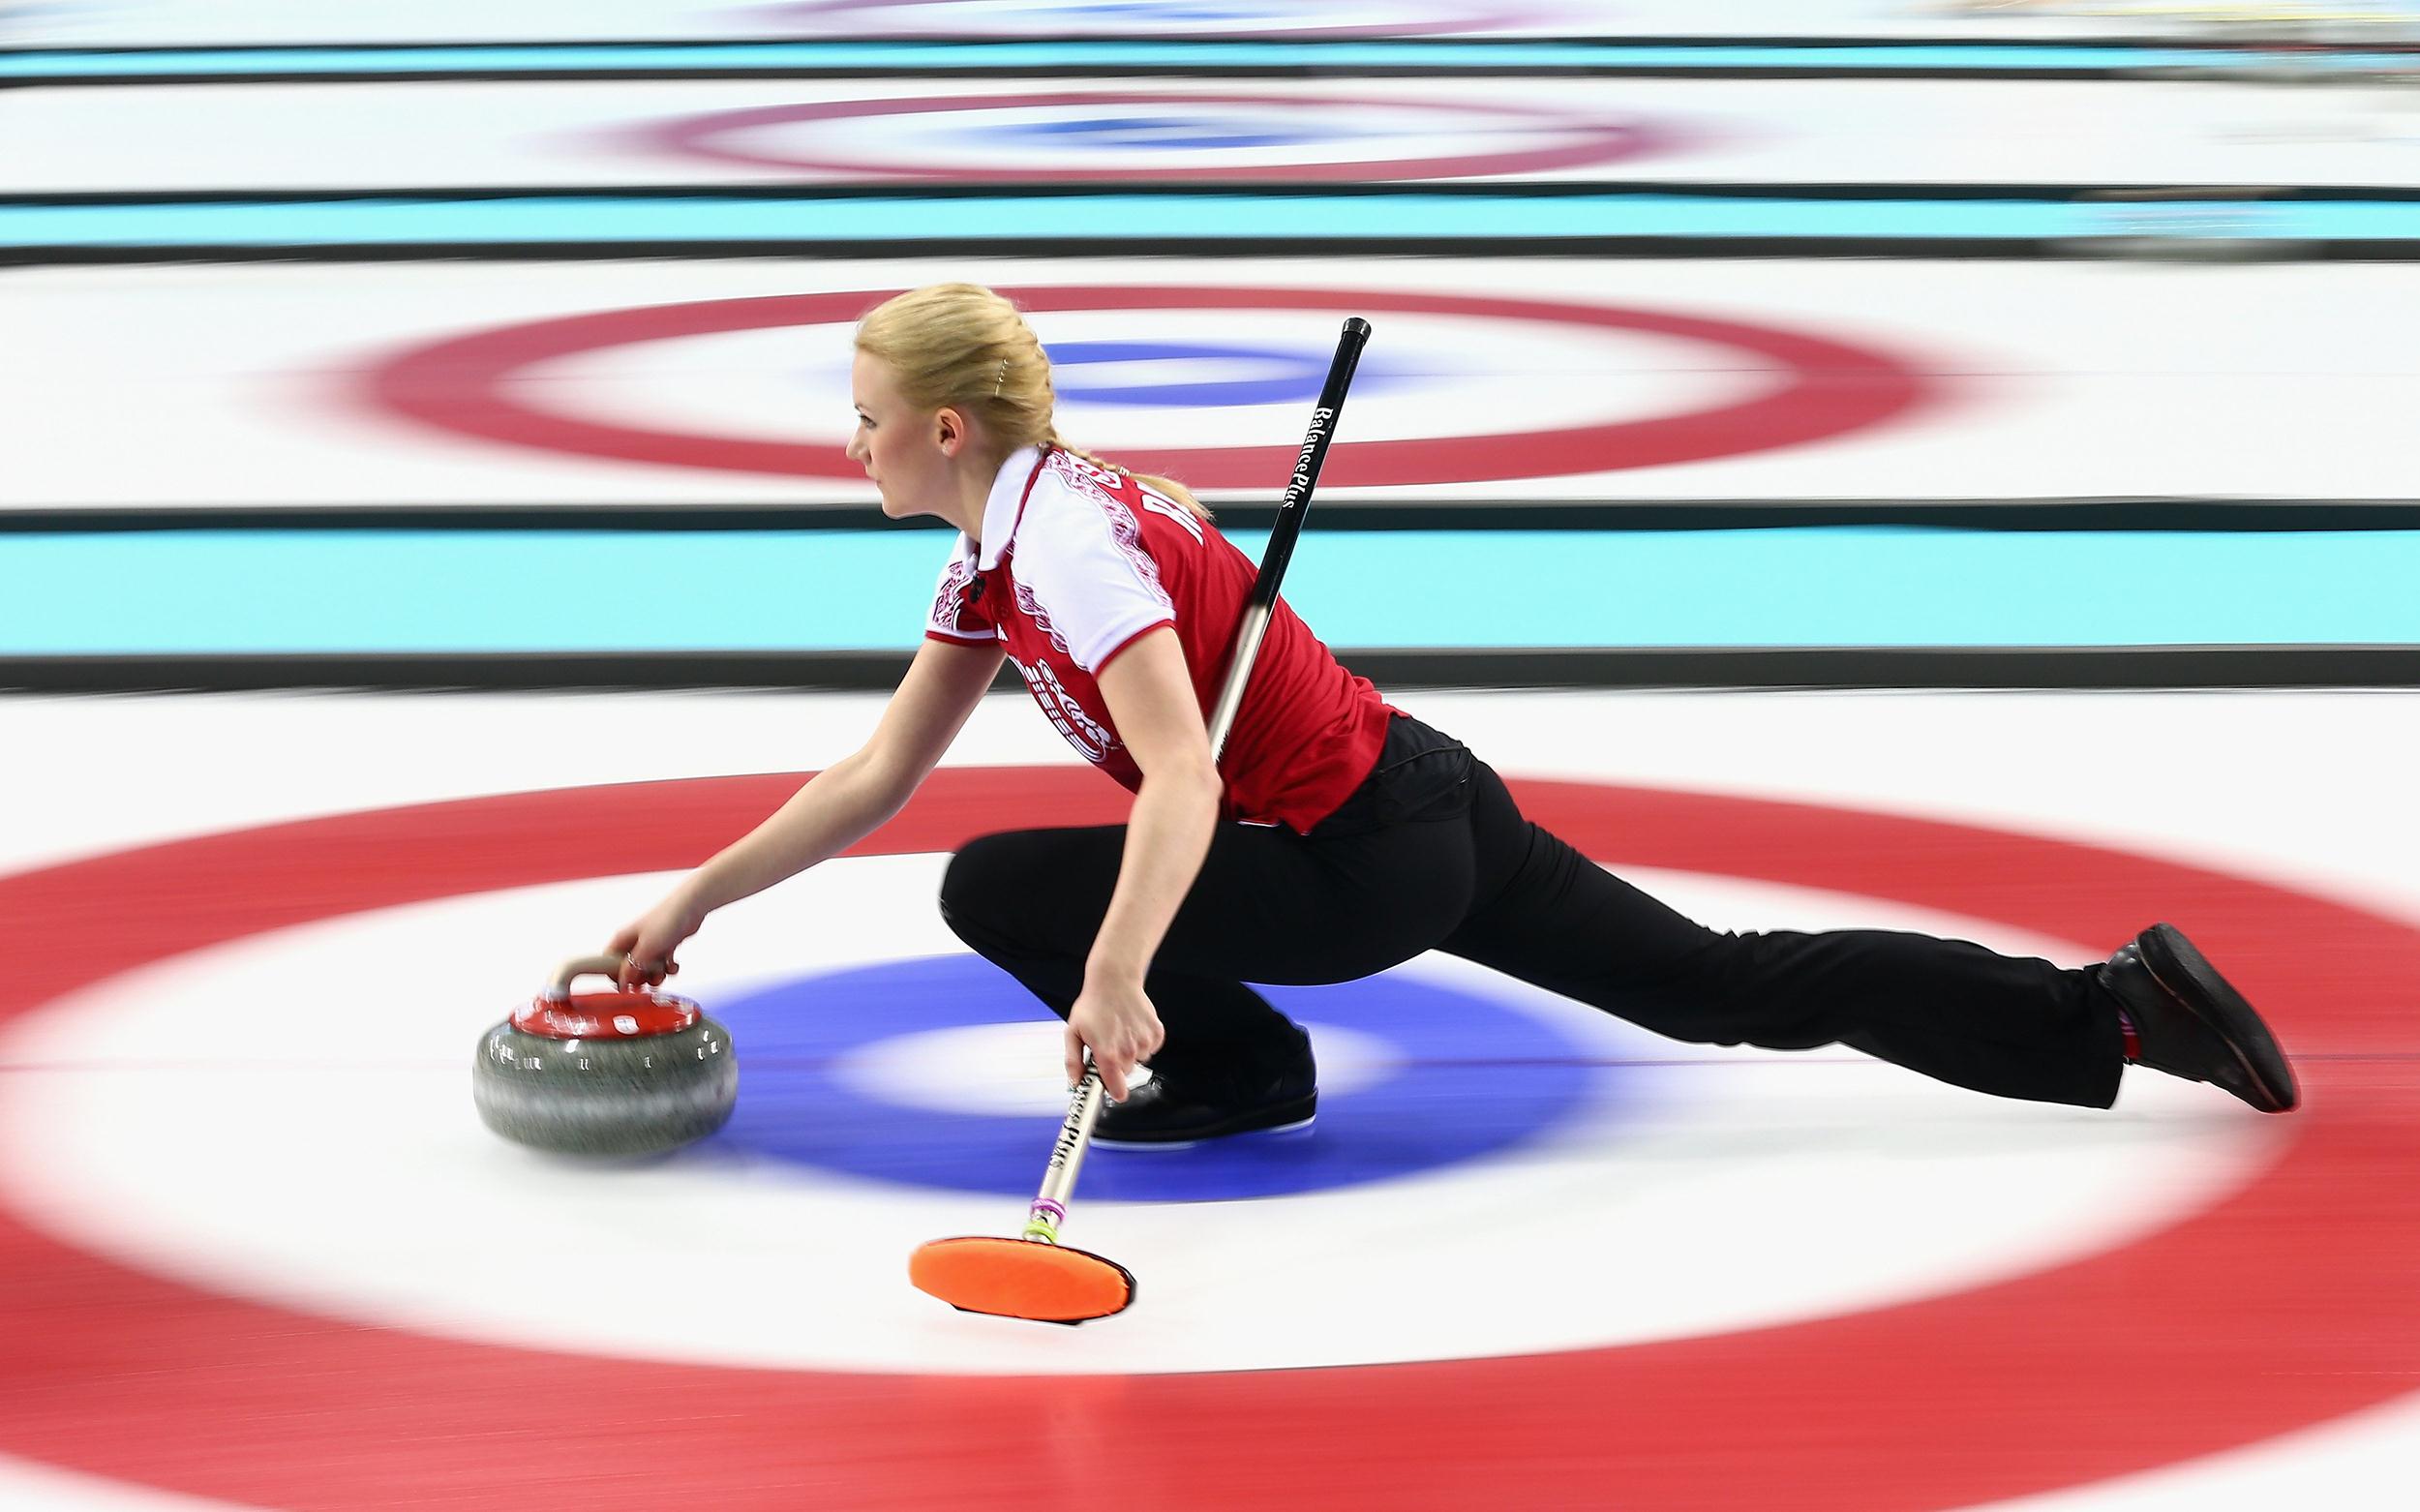 Use Of High Tech Brooms Divides Low Sport Curling